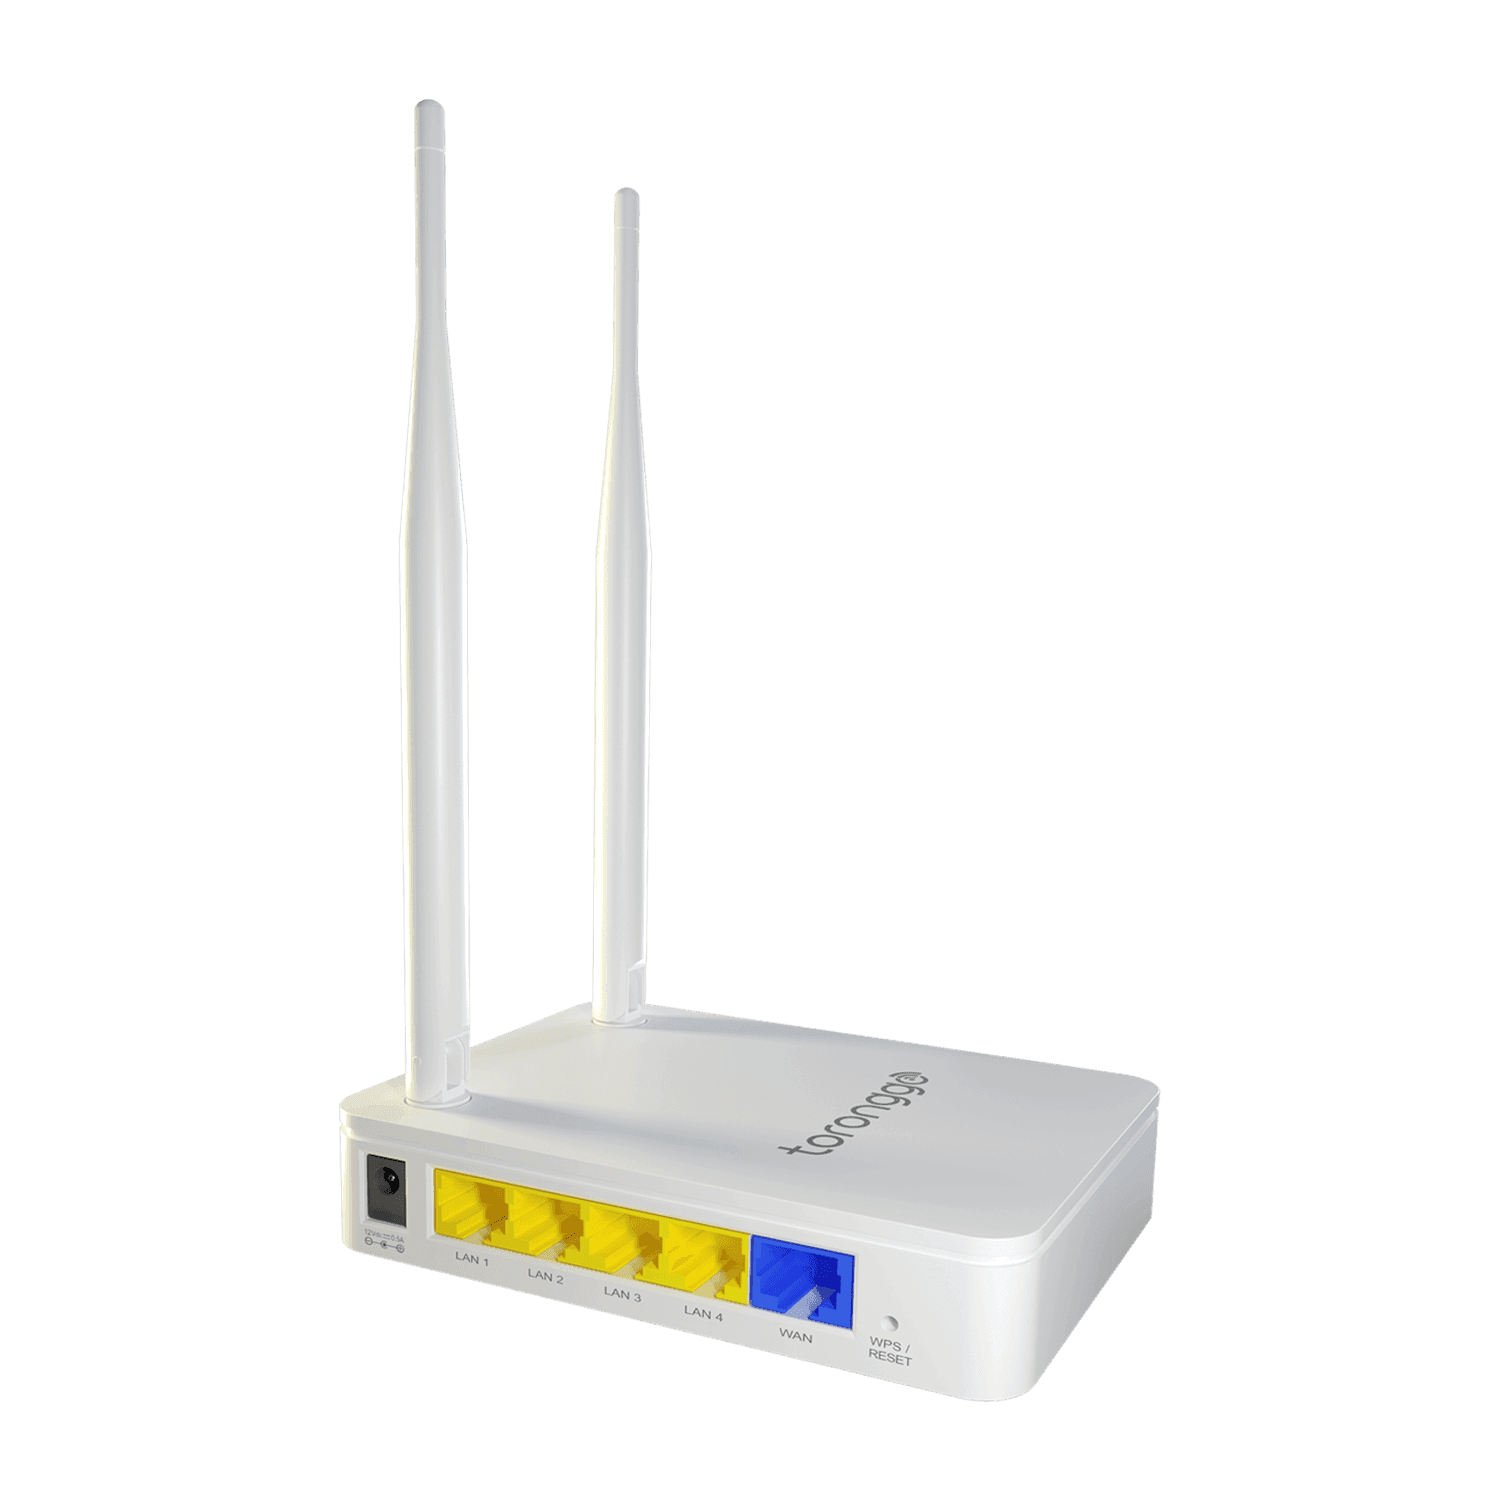 Wifi Router Prices in Bangladesh